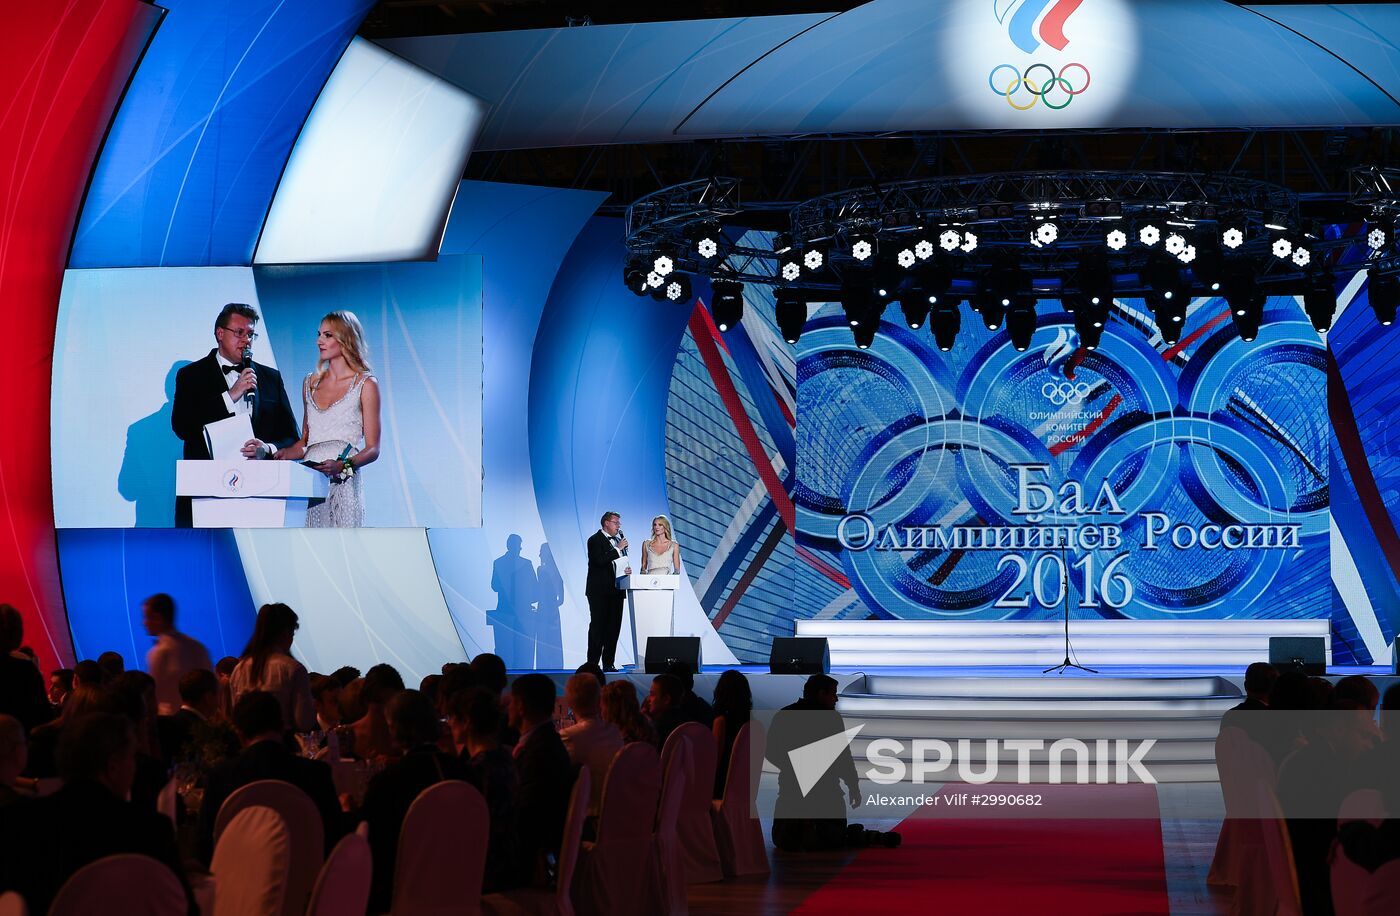 2016 Olympic Champions Ball in Moscow